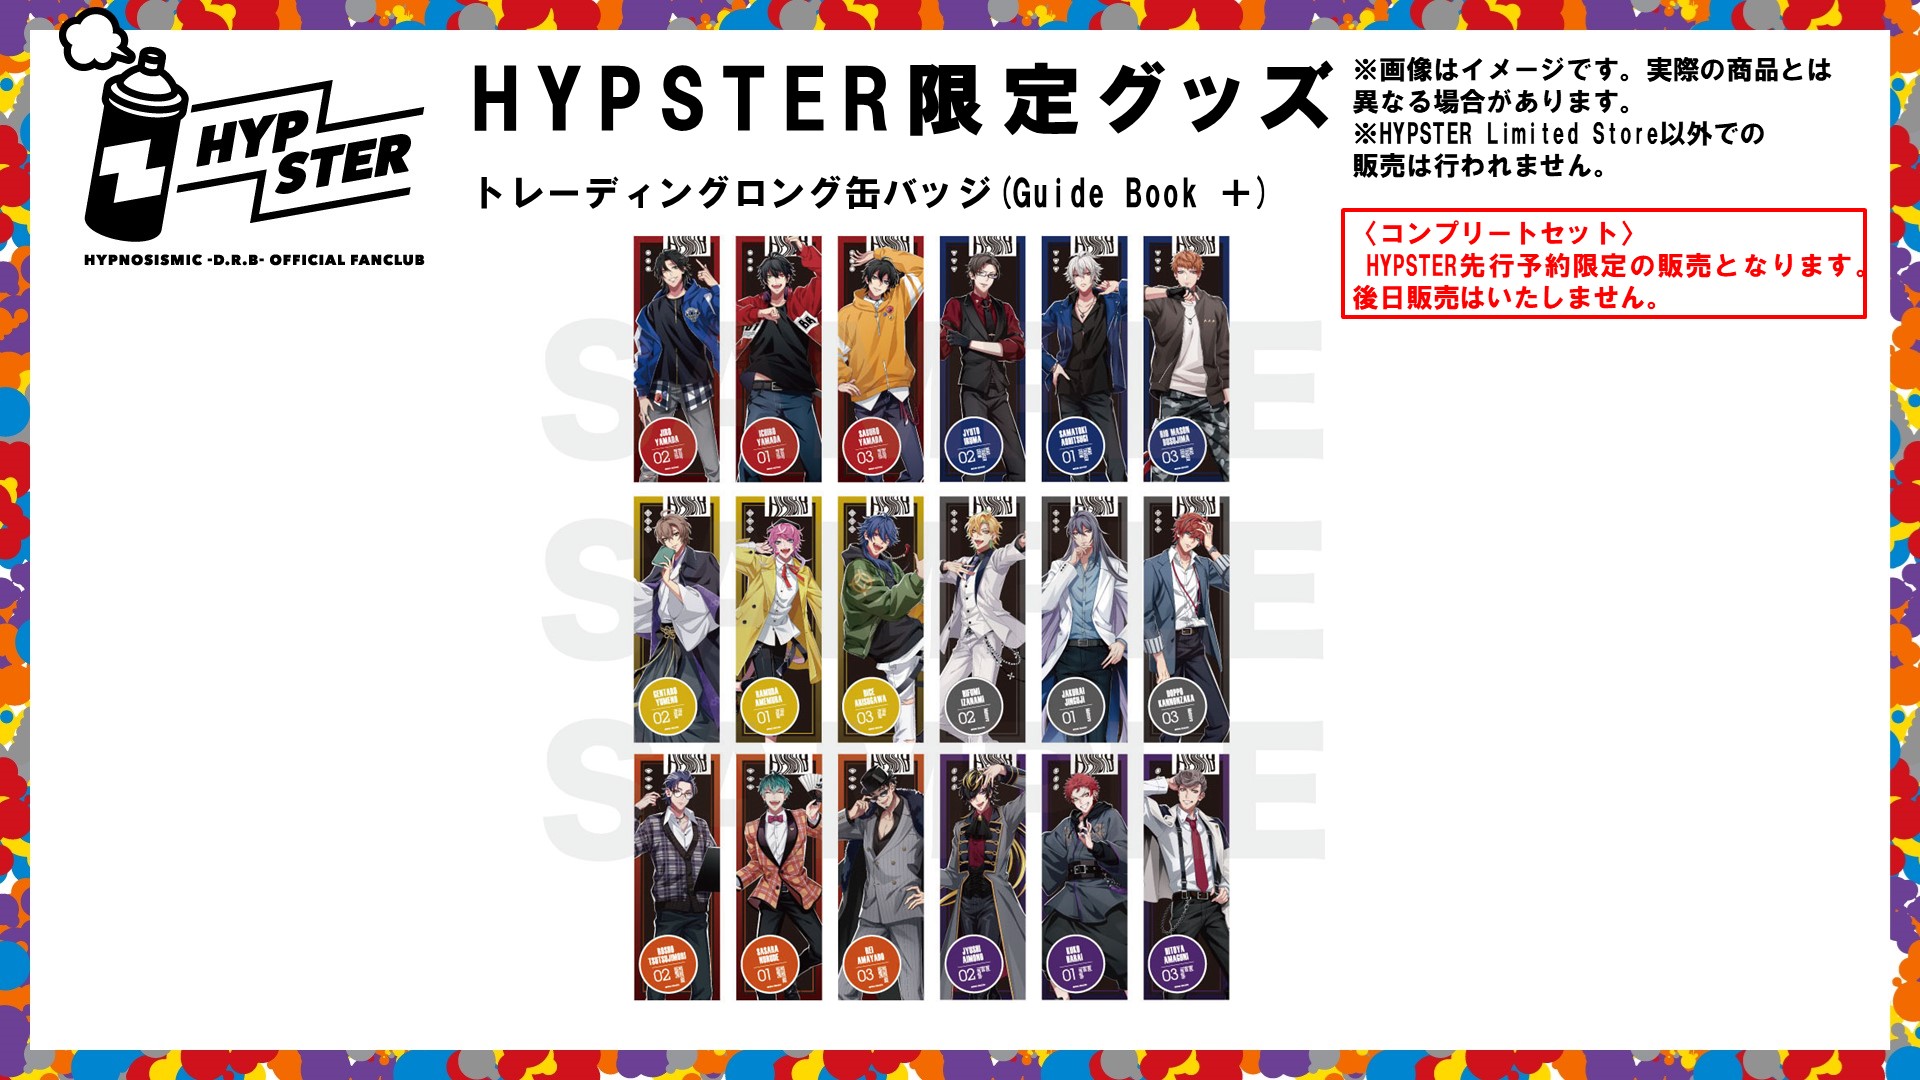 HYPSTER Limited Store」再入荷のご案内｜HYPSTER｜HYPNOSISMIC -D.R.B 